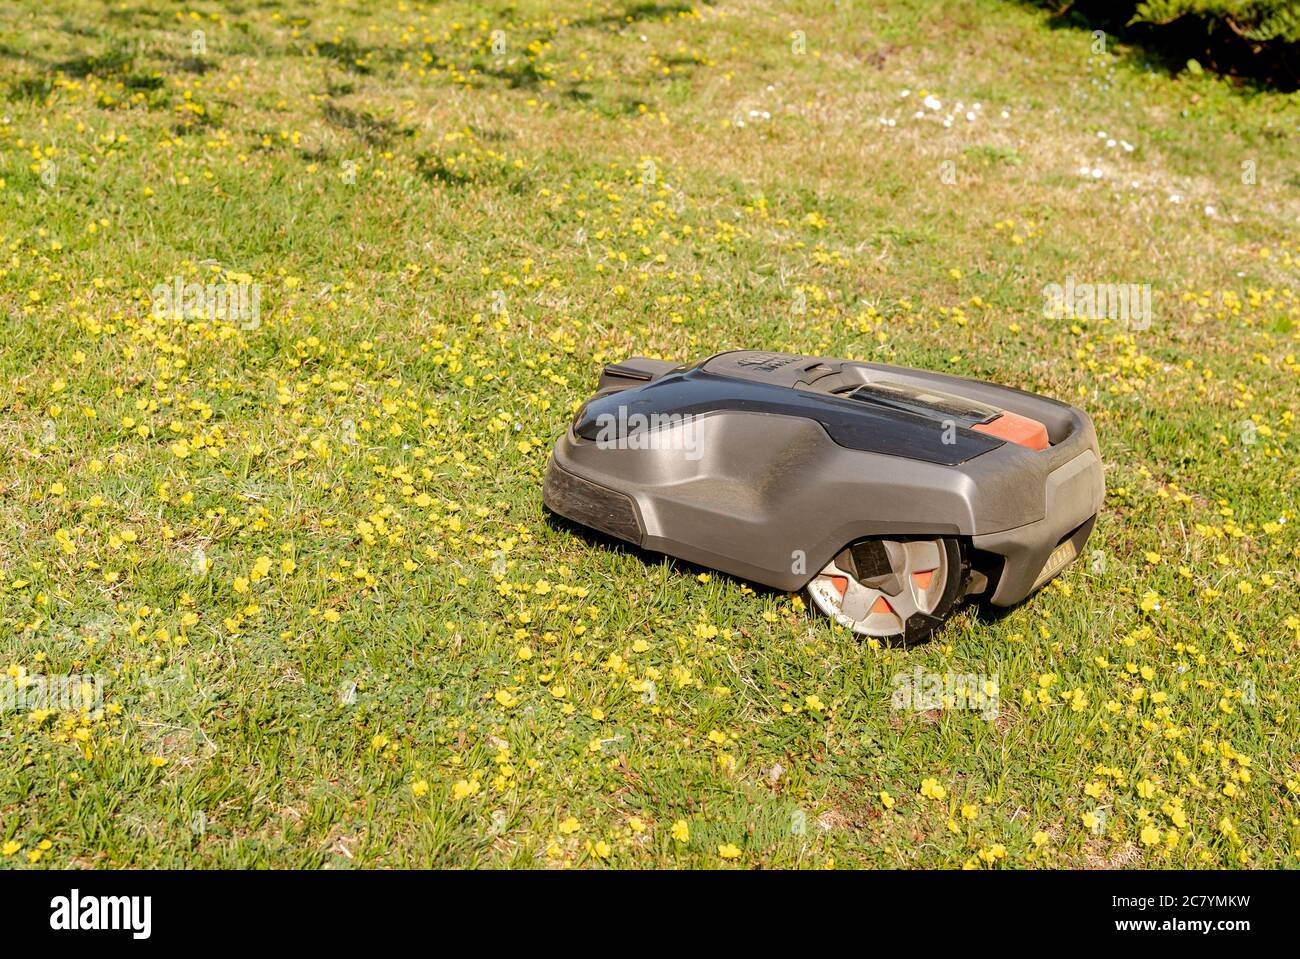 Robotic Lawn Mower cutting grass in the garden. Stock Photo